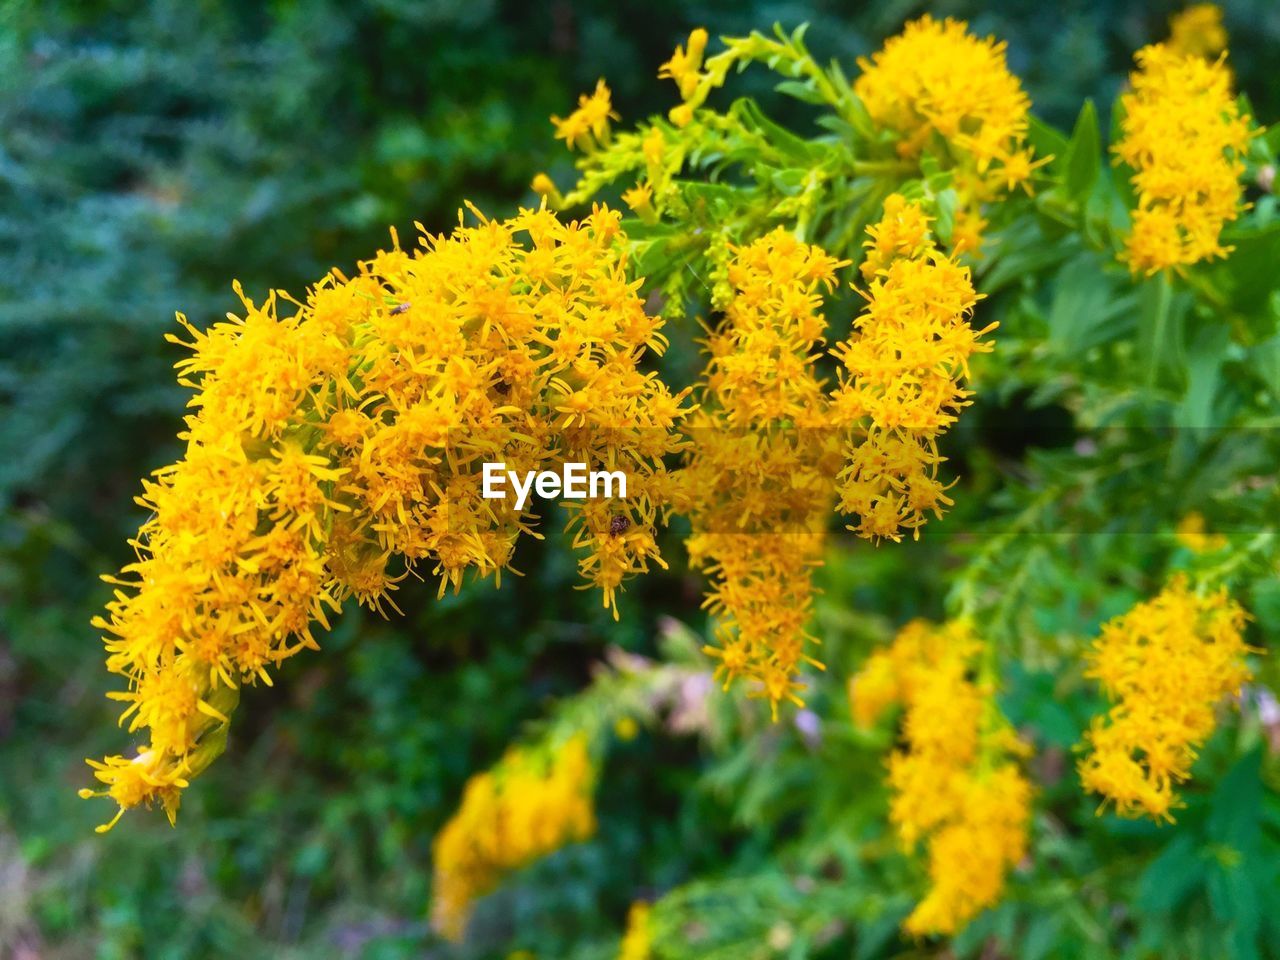 Close-up of yellow flowering plant growing outdoors